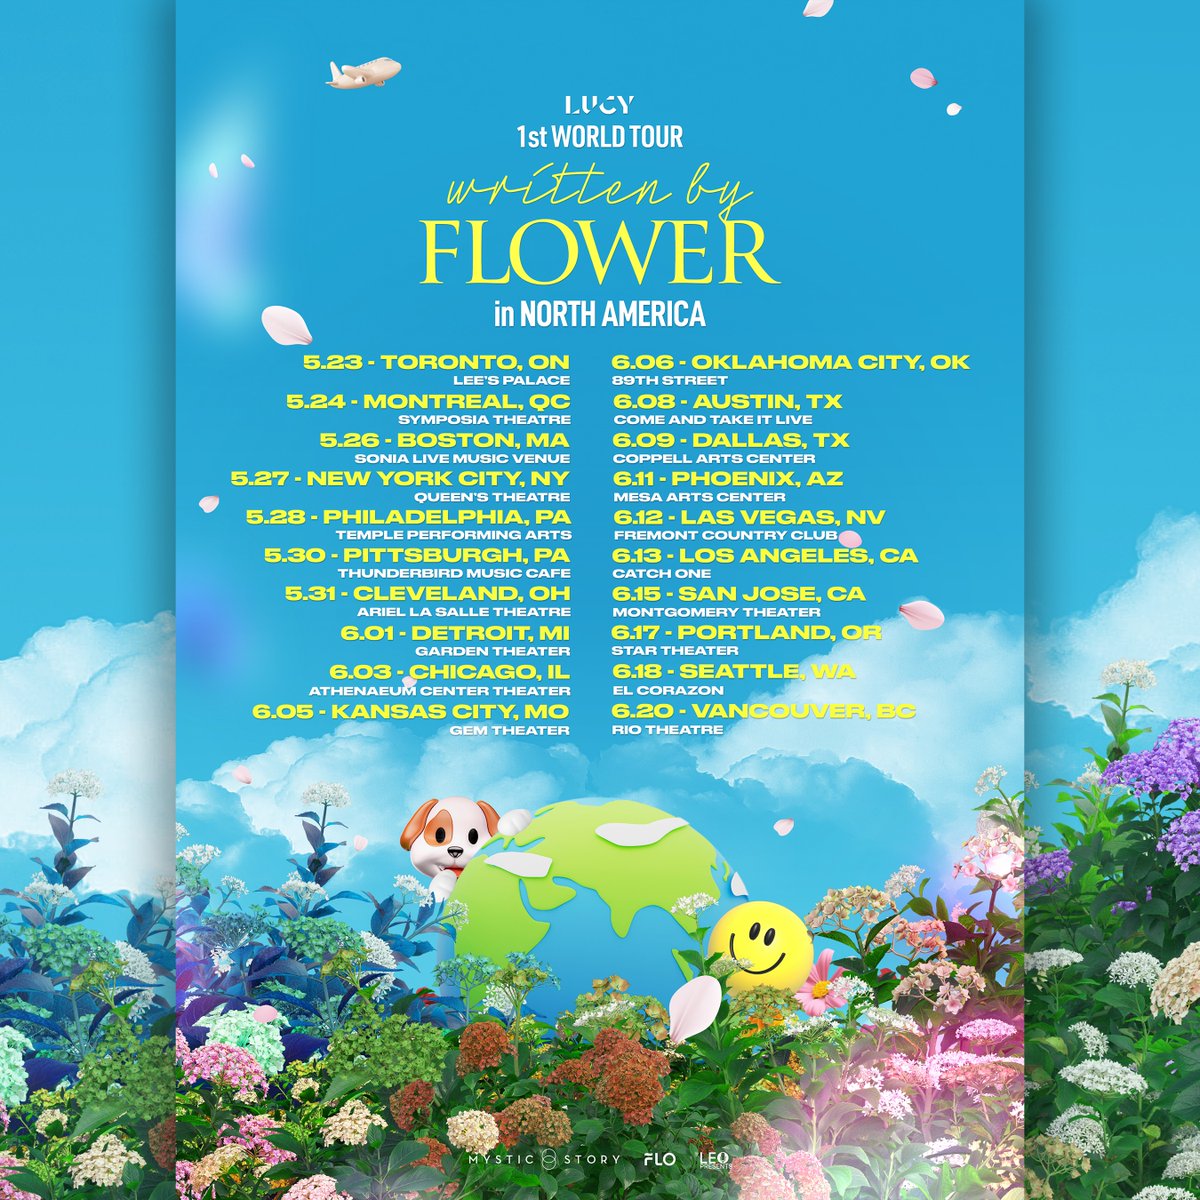 Presented by @LeoPresents, K-Pop sensations @BANDLUCY_mystic are coming to North America on their “1st World Tour written by FLOWER” this summer! Tickets go on sale Fri, April 19 at 10AM (CST).